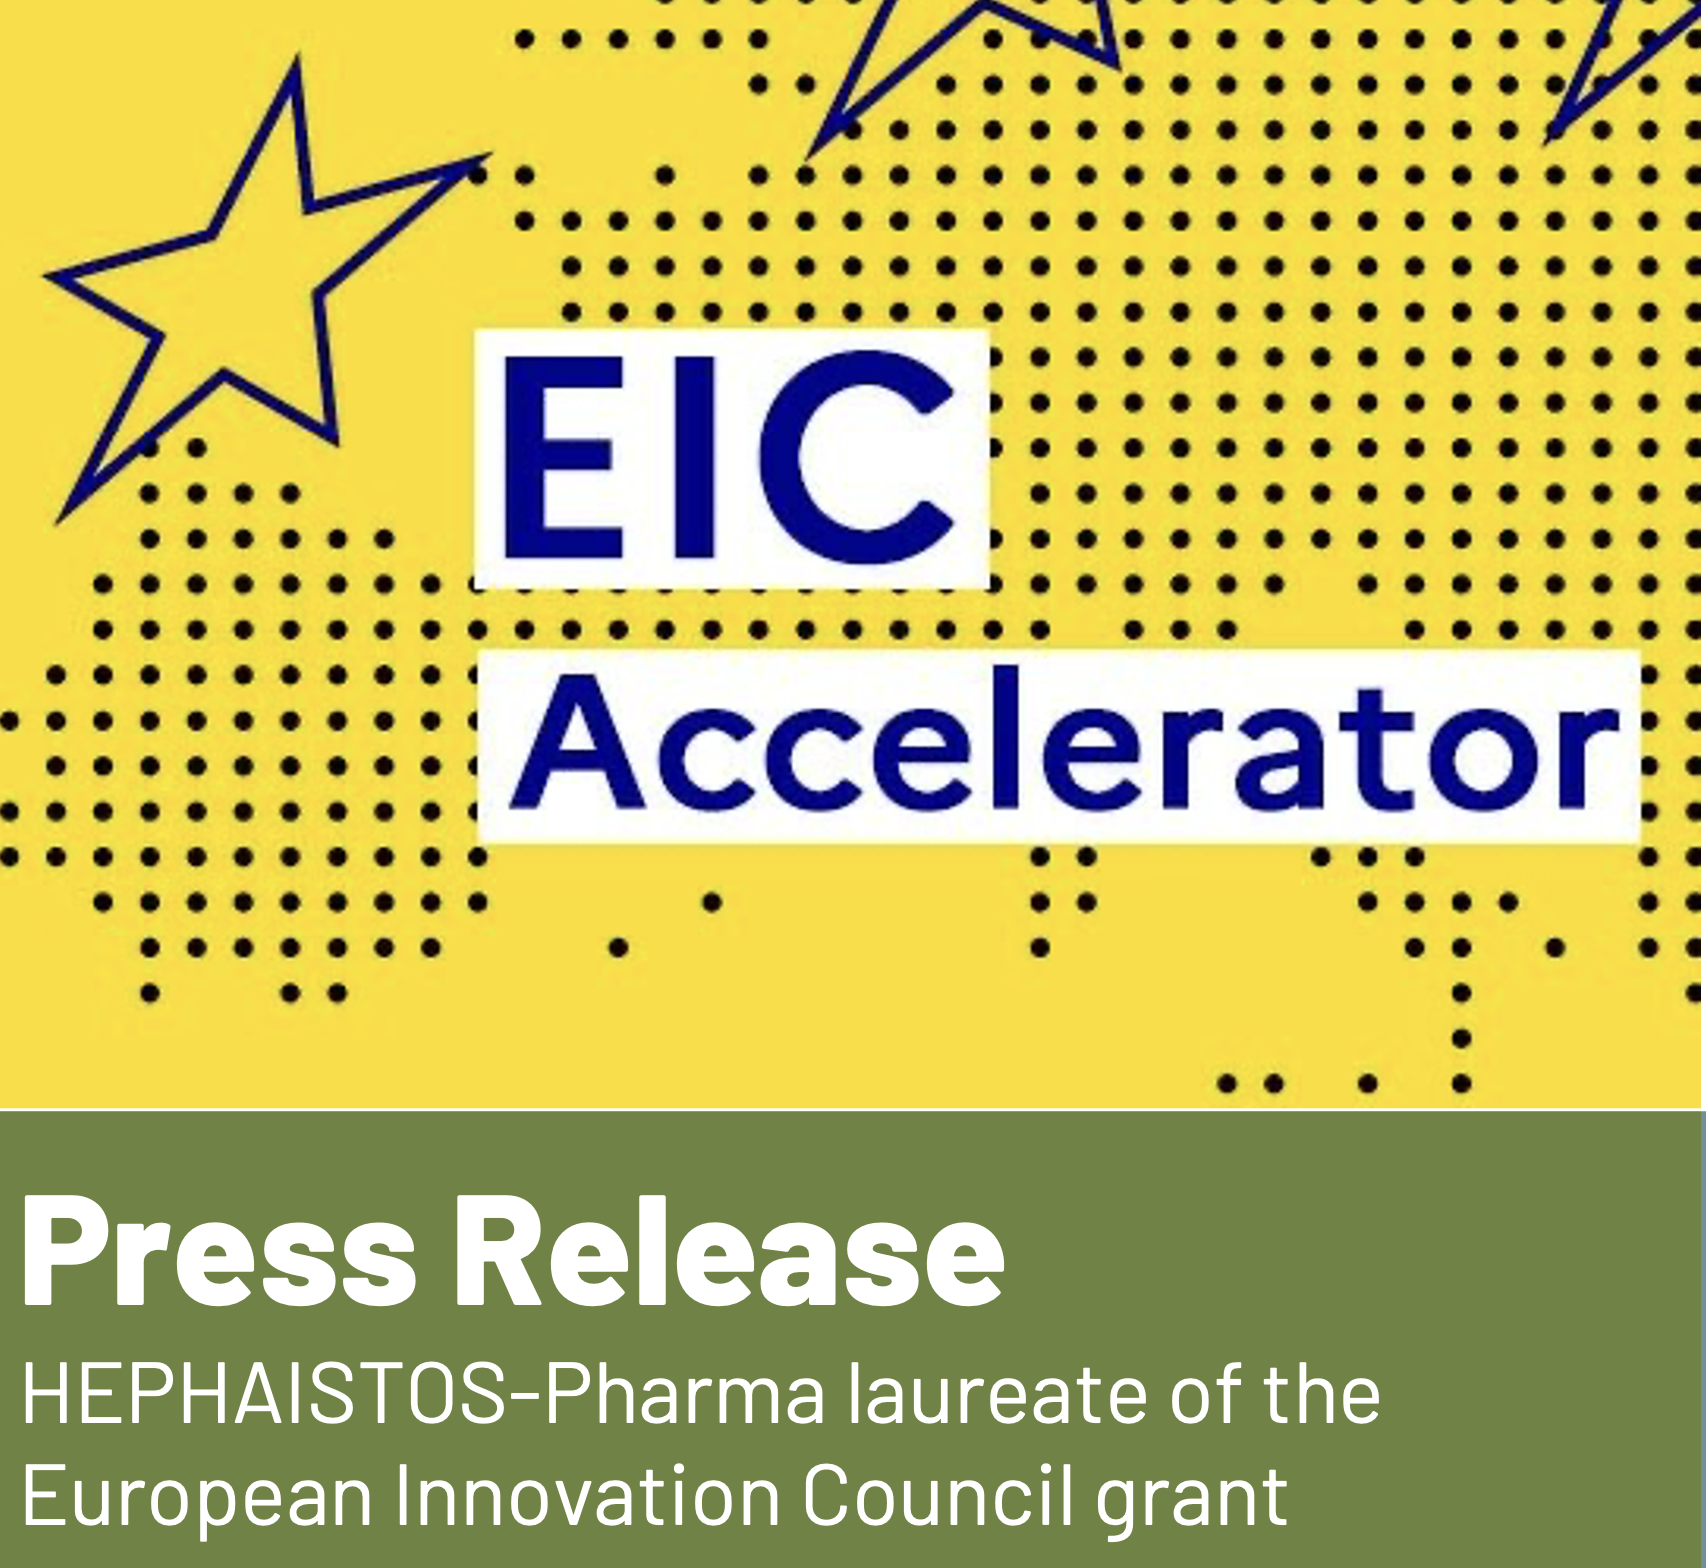 EIC Accelerator Grant Competition Winner